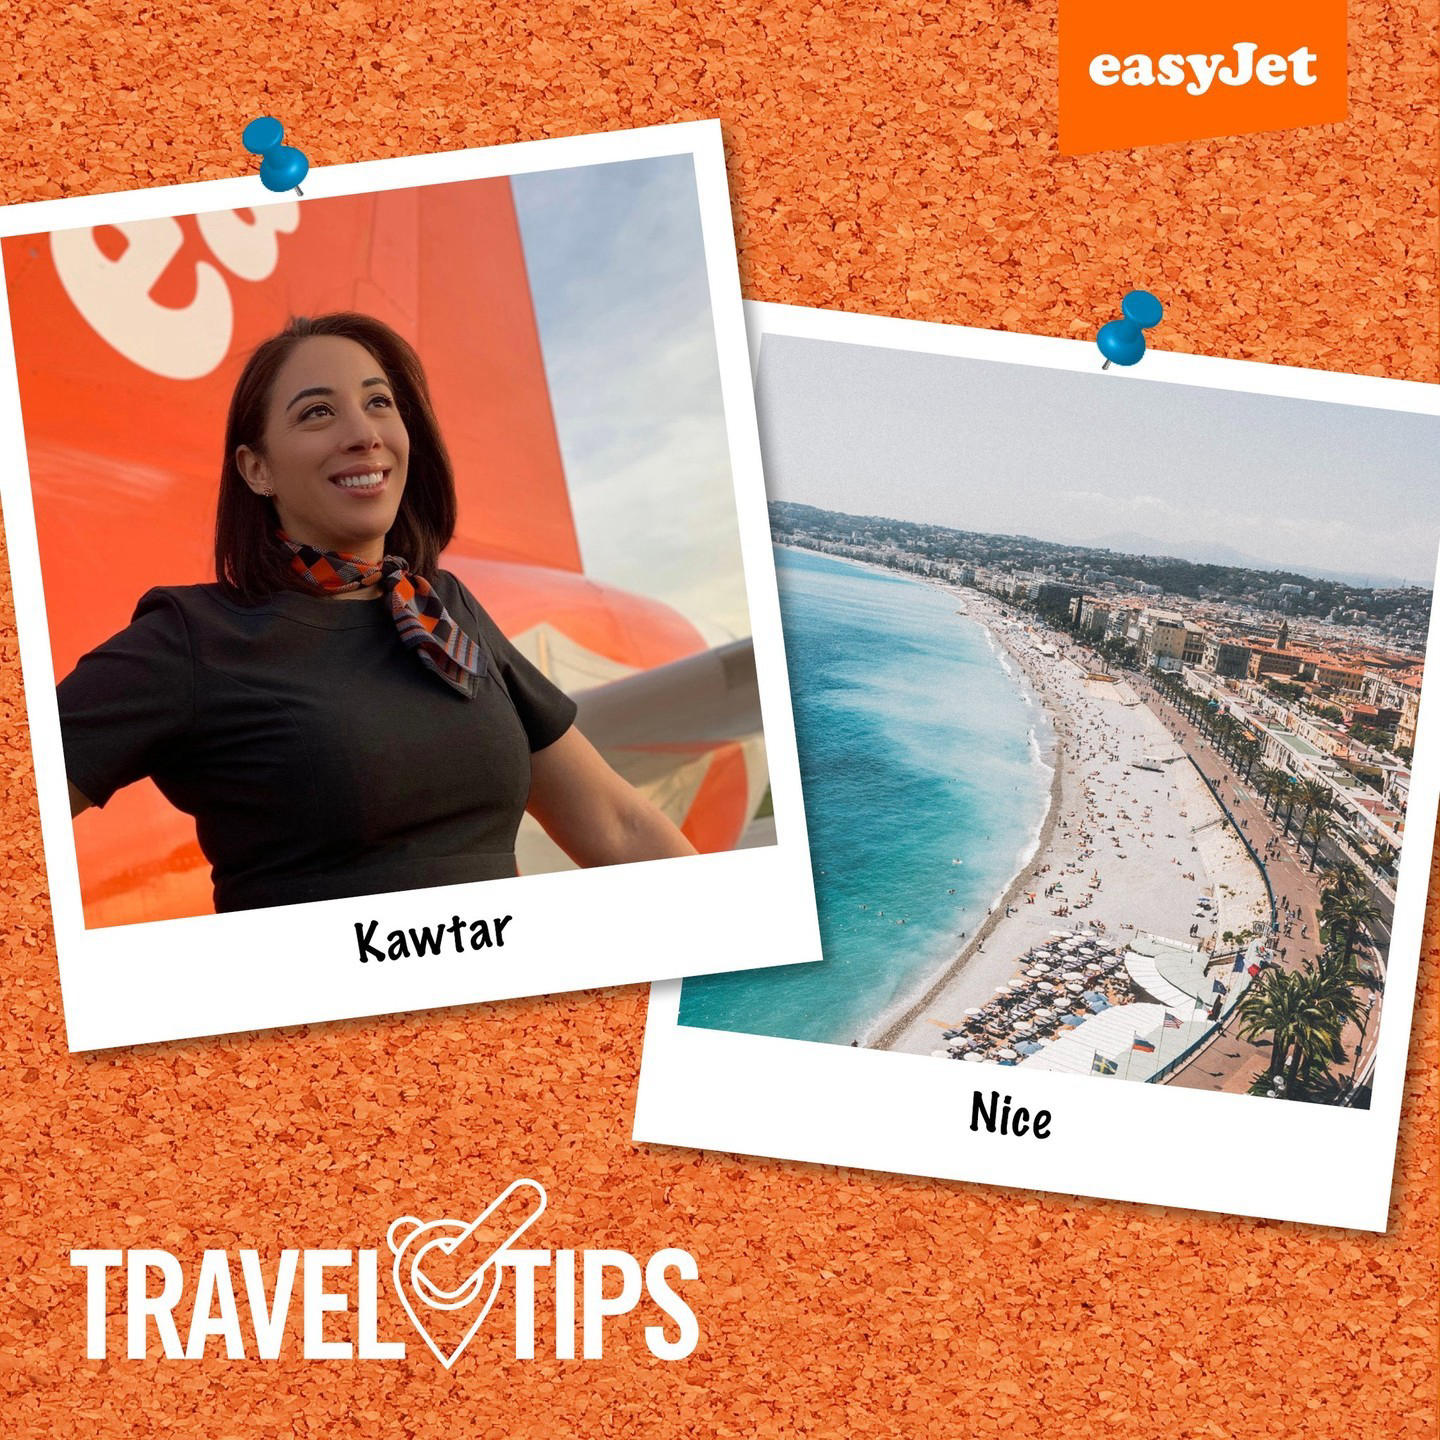 image  1 easyJet - “Nice is a beautiful city and there are many places for sightseeing along the famous ‘Prom